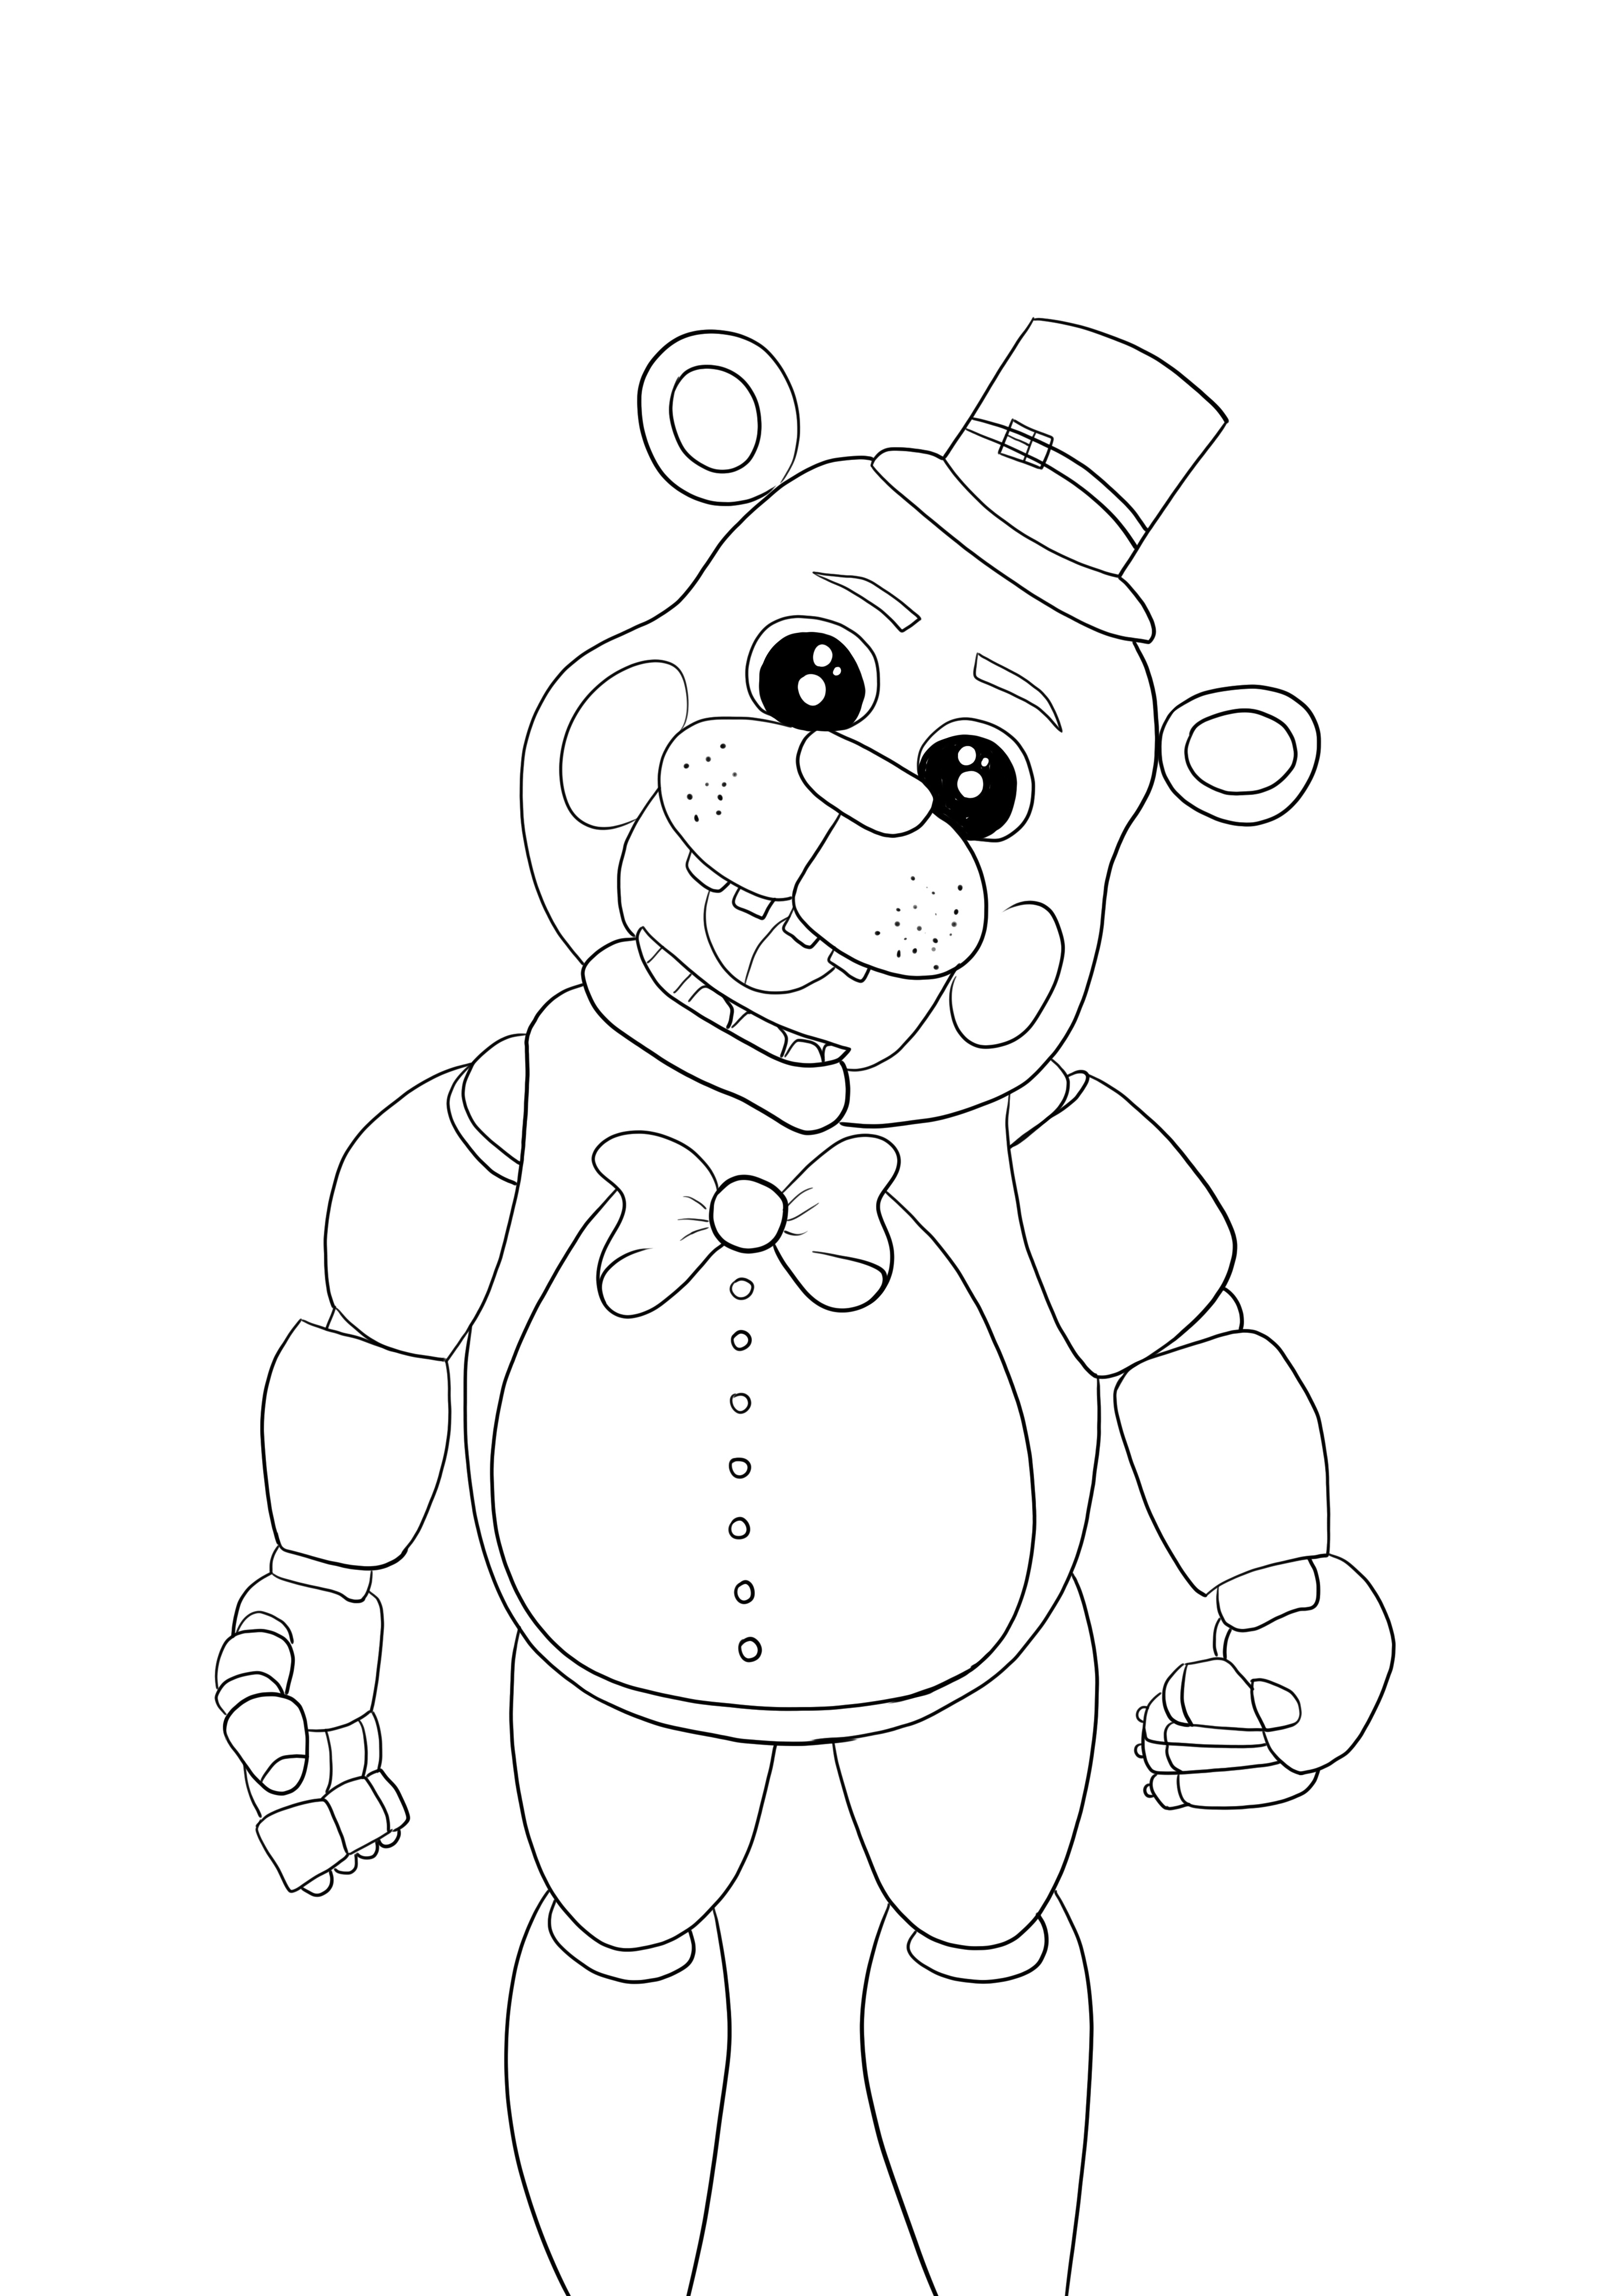 Cute five nights Freddy free downloading image for kids